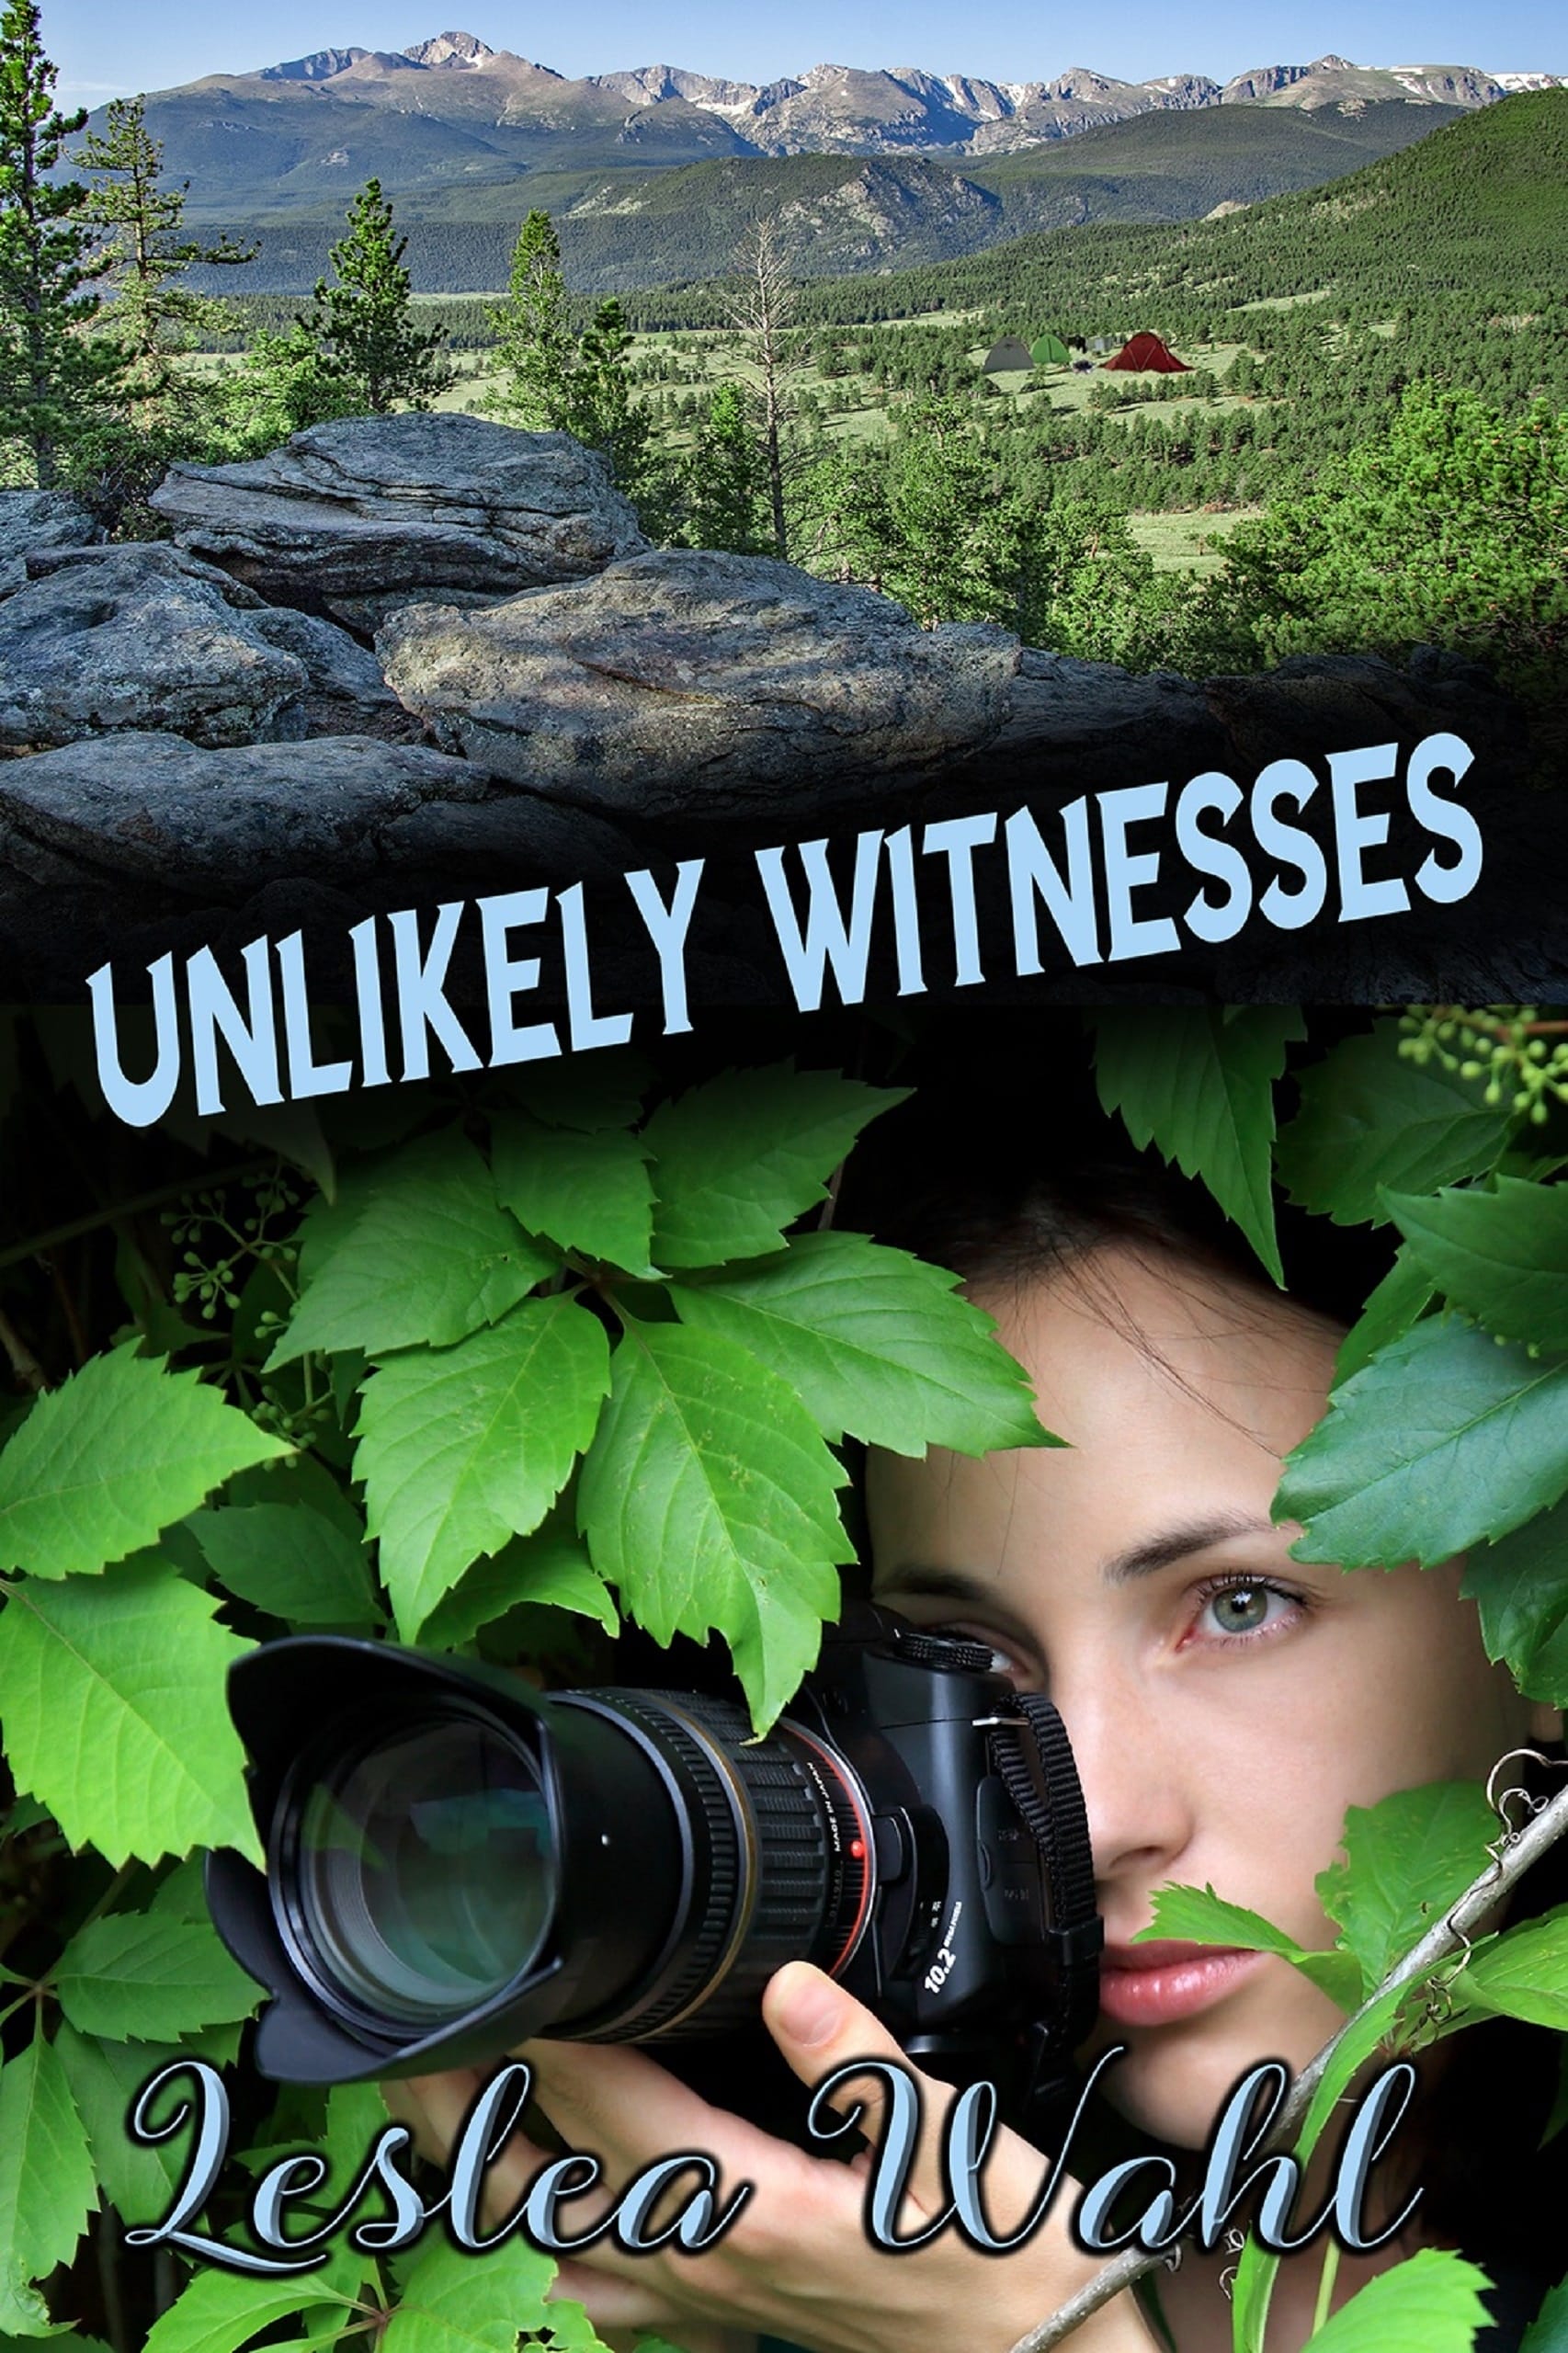 Unlikely_Witnesses_med_300